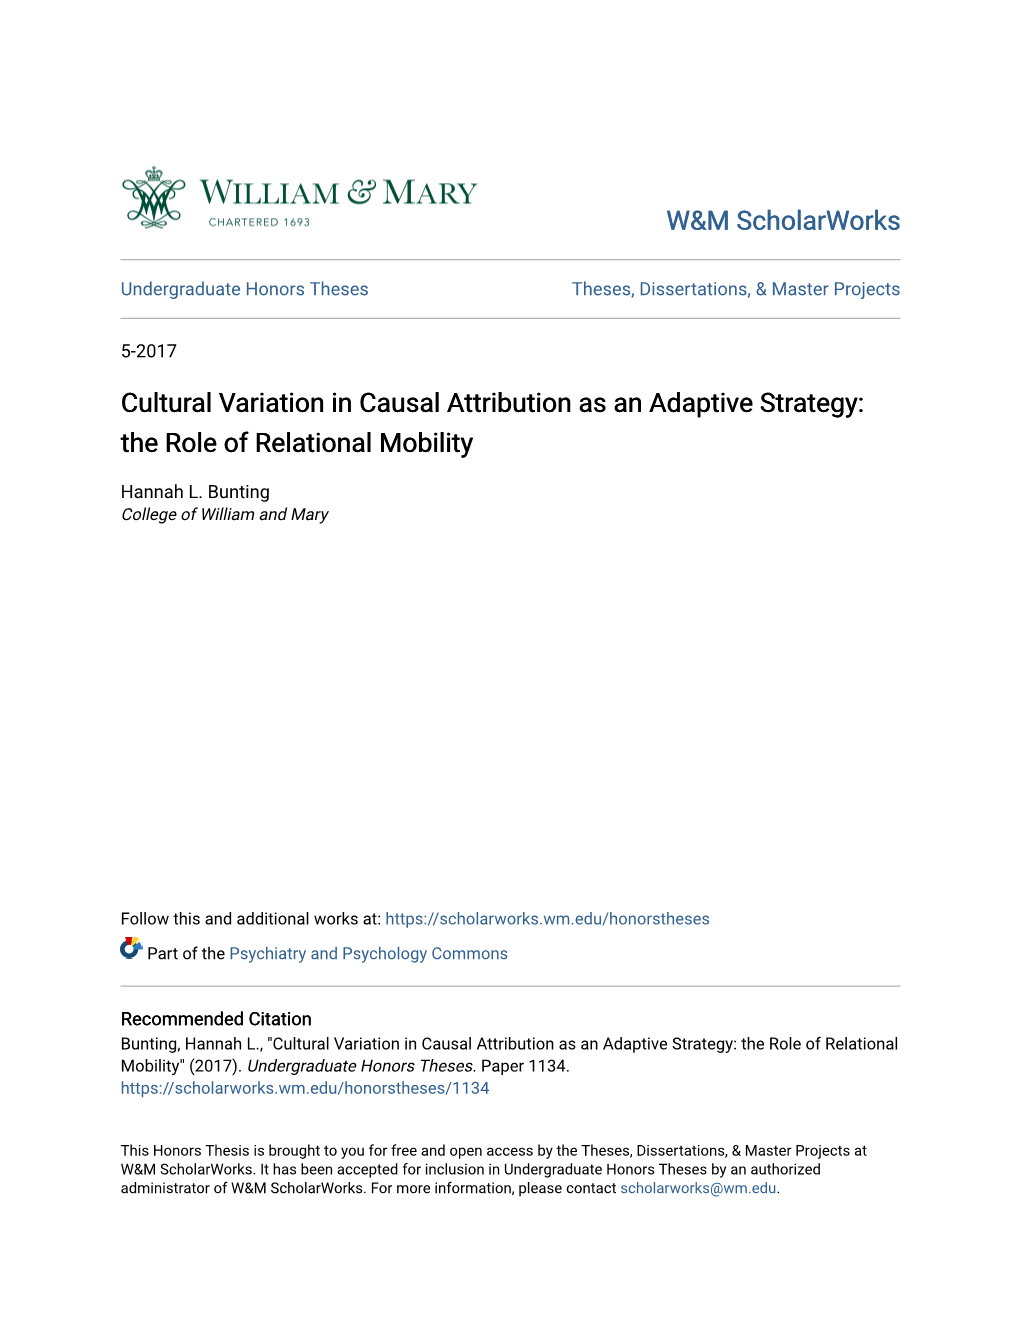 Cultural Variation in Causal Attribution As an Adaptive Strategy: the Role of Relational Mobility